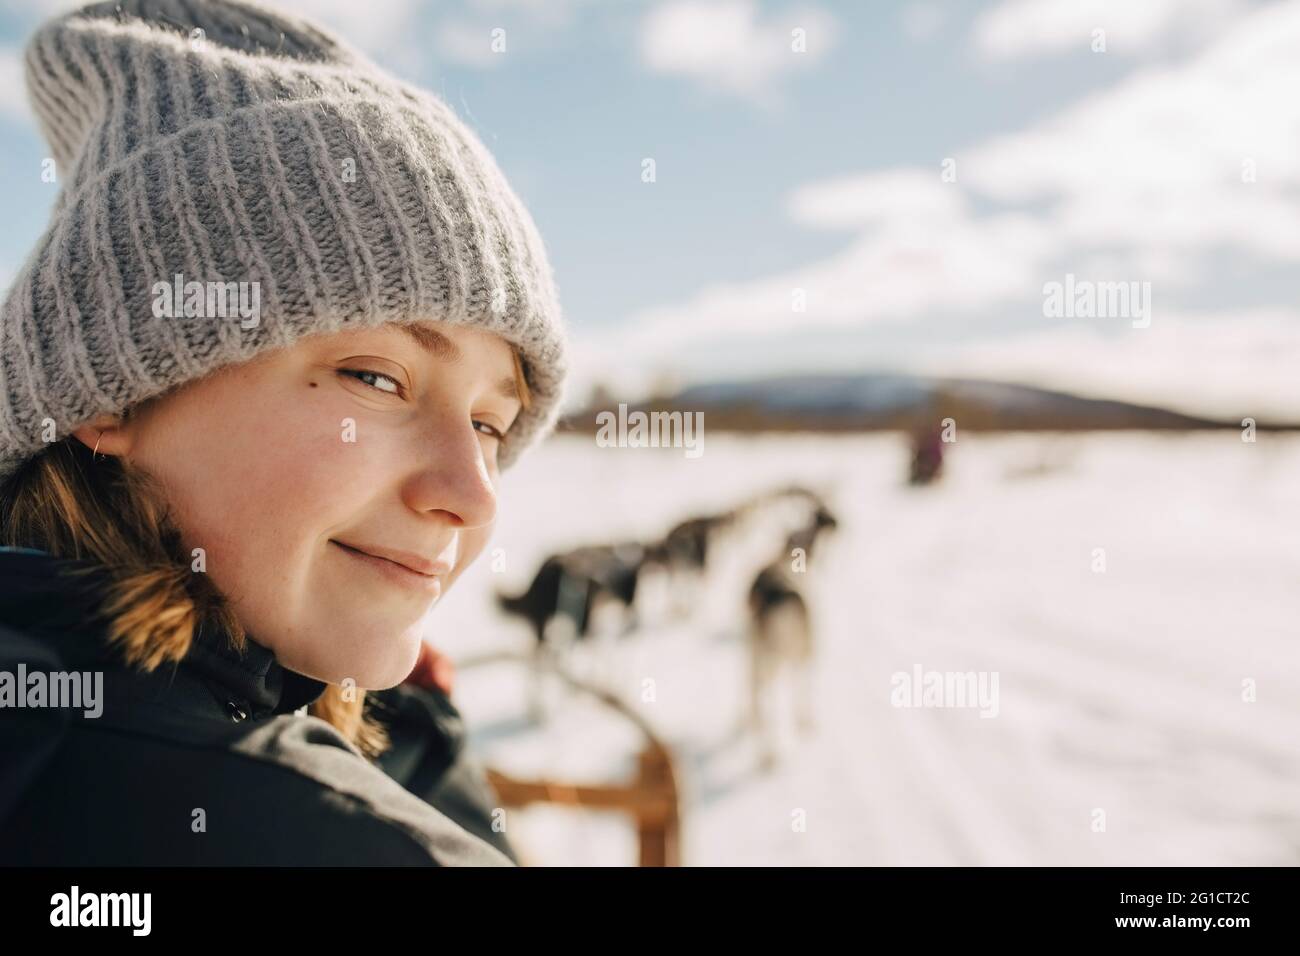 Portrait of teenage girl wearing knit hat doing dogsledding during winter Stock Photo